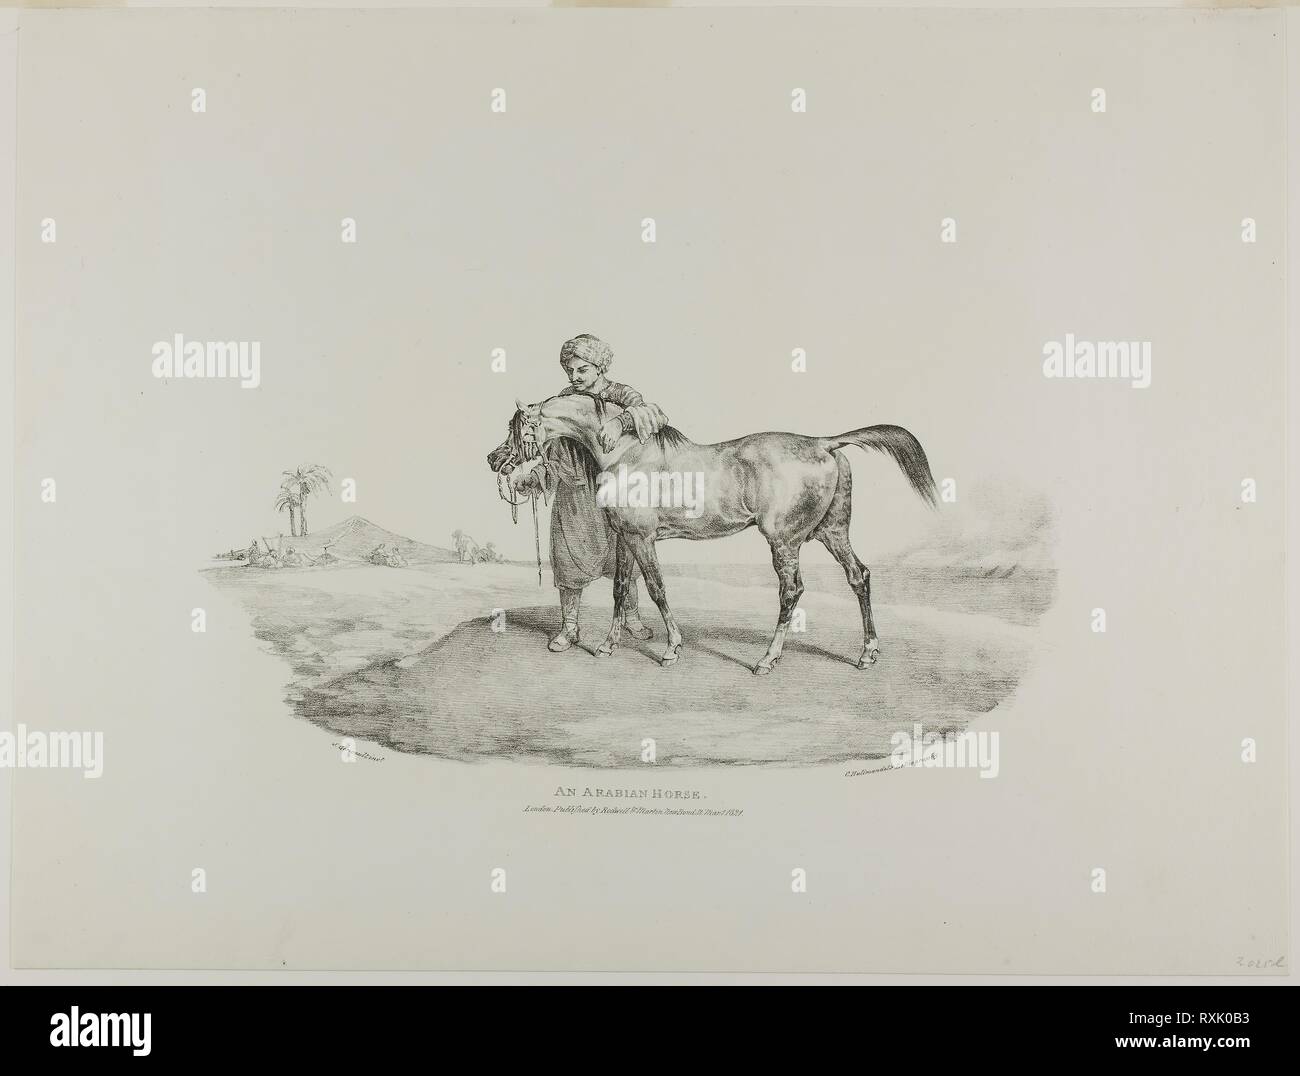 An Arabian Horse, plate 8 from Various Subjects Drawn from Life on Stone. Jean Louis André Théodore Géricault (French, 1791-1824); printed by Charles Joseph Hullmandel (German and English, 1789-1850); published by Rodwell and Martin. Date: 1821. Dimensions: 170 × 335 mm (image); 377 × 495 mm (sheet). Lithograph in black on ivory wove paper. Origin: France. Museum: The Chicago Art Institute. Stock Photo